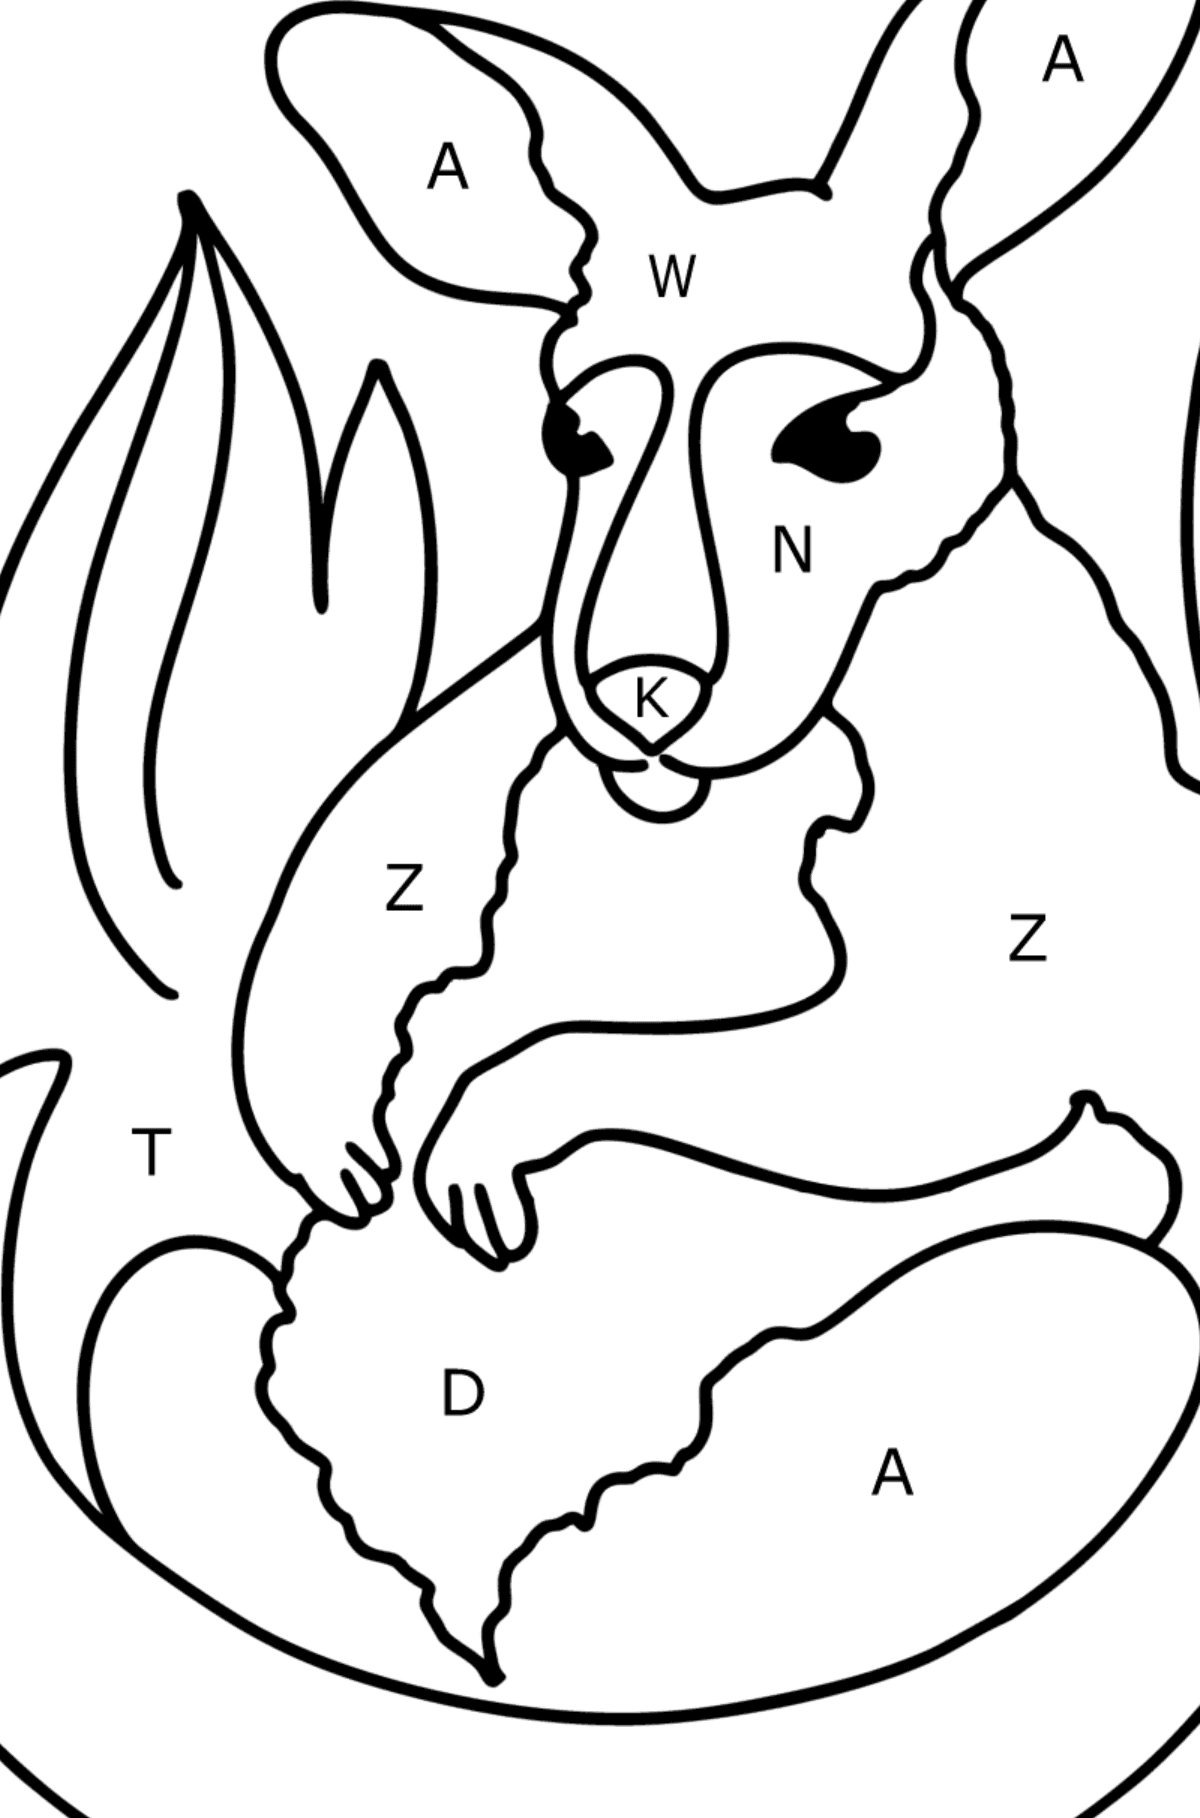 Coloring page - Adorable baby kangaroo - Coloring by Letters for Kids